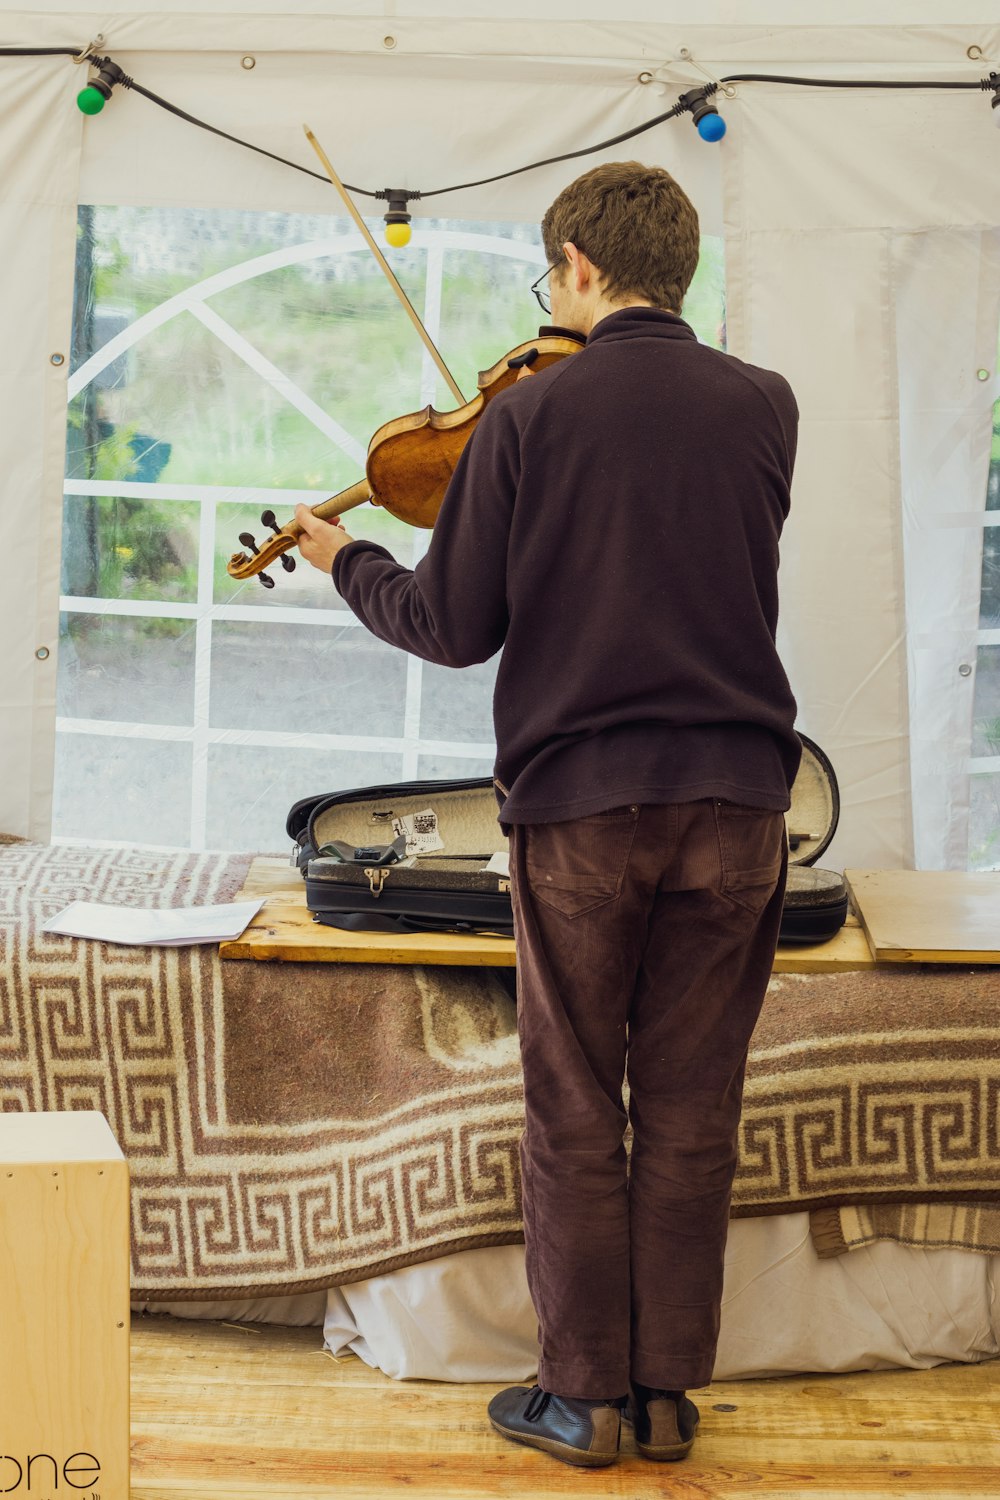 man playing violin in room